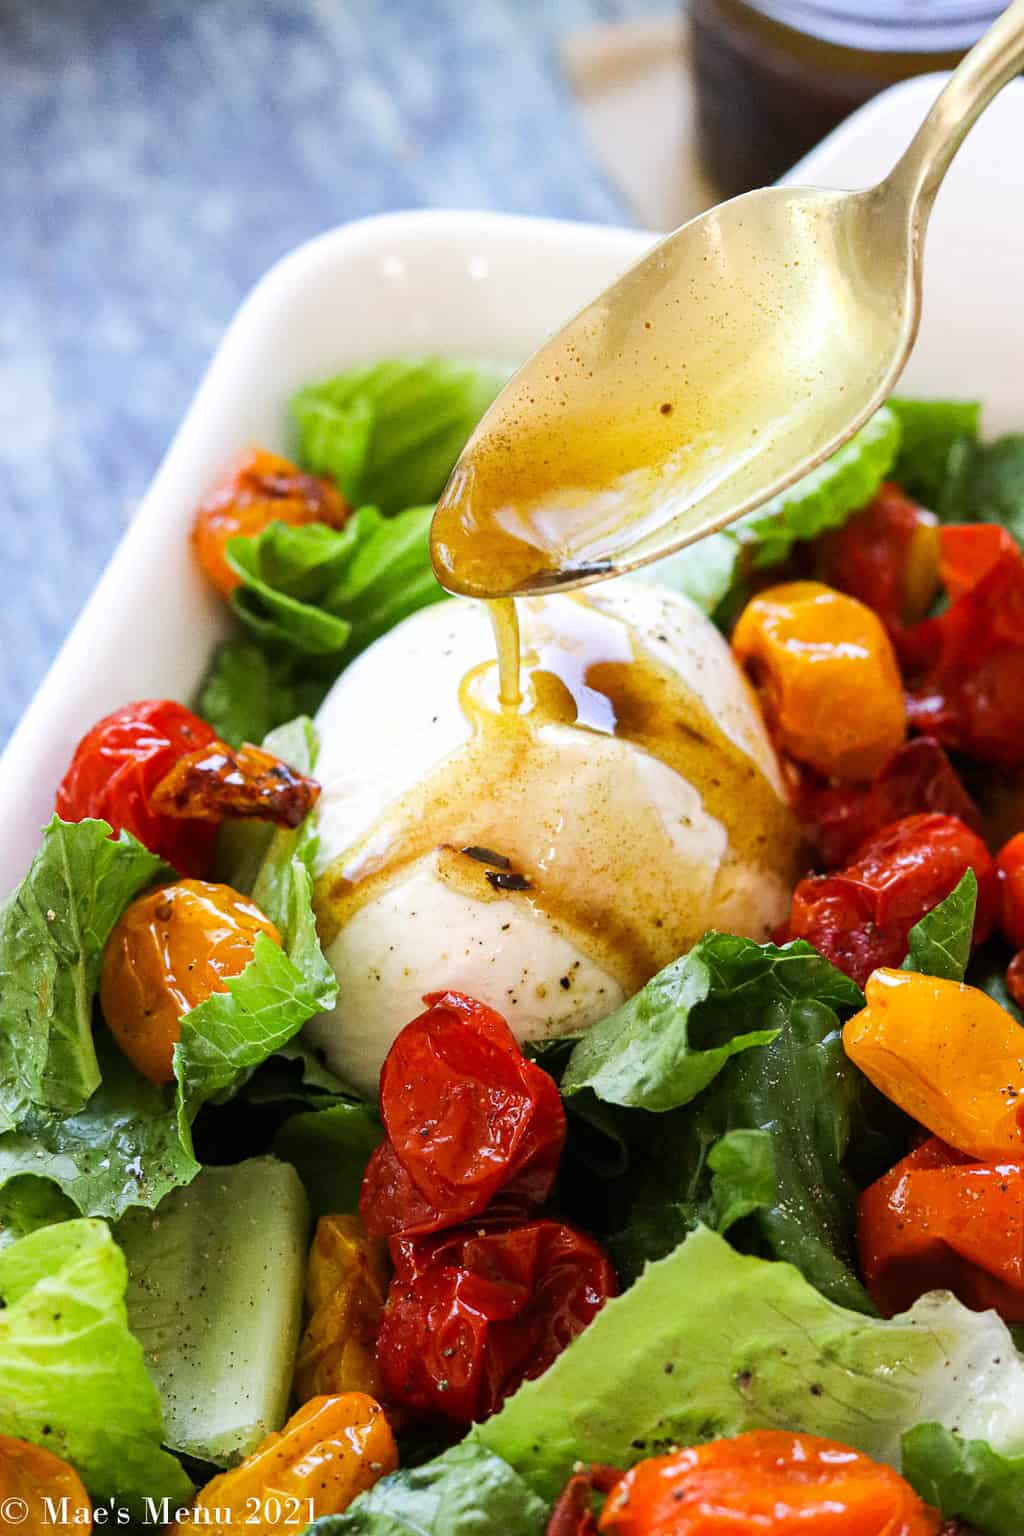 Drizzling the dressing over the burrata salad with roast tomatoes